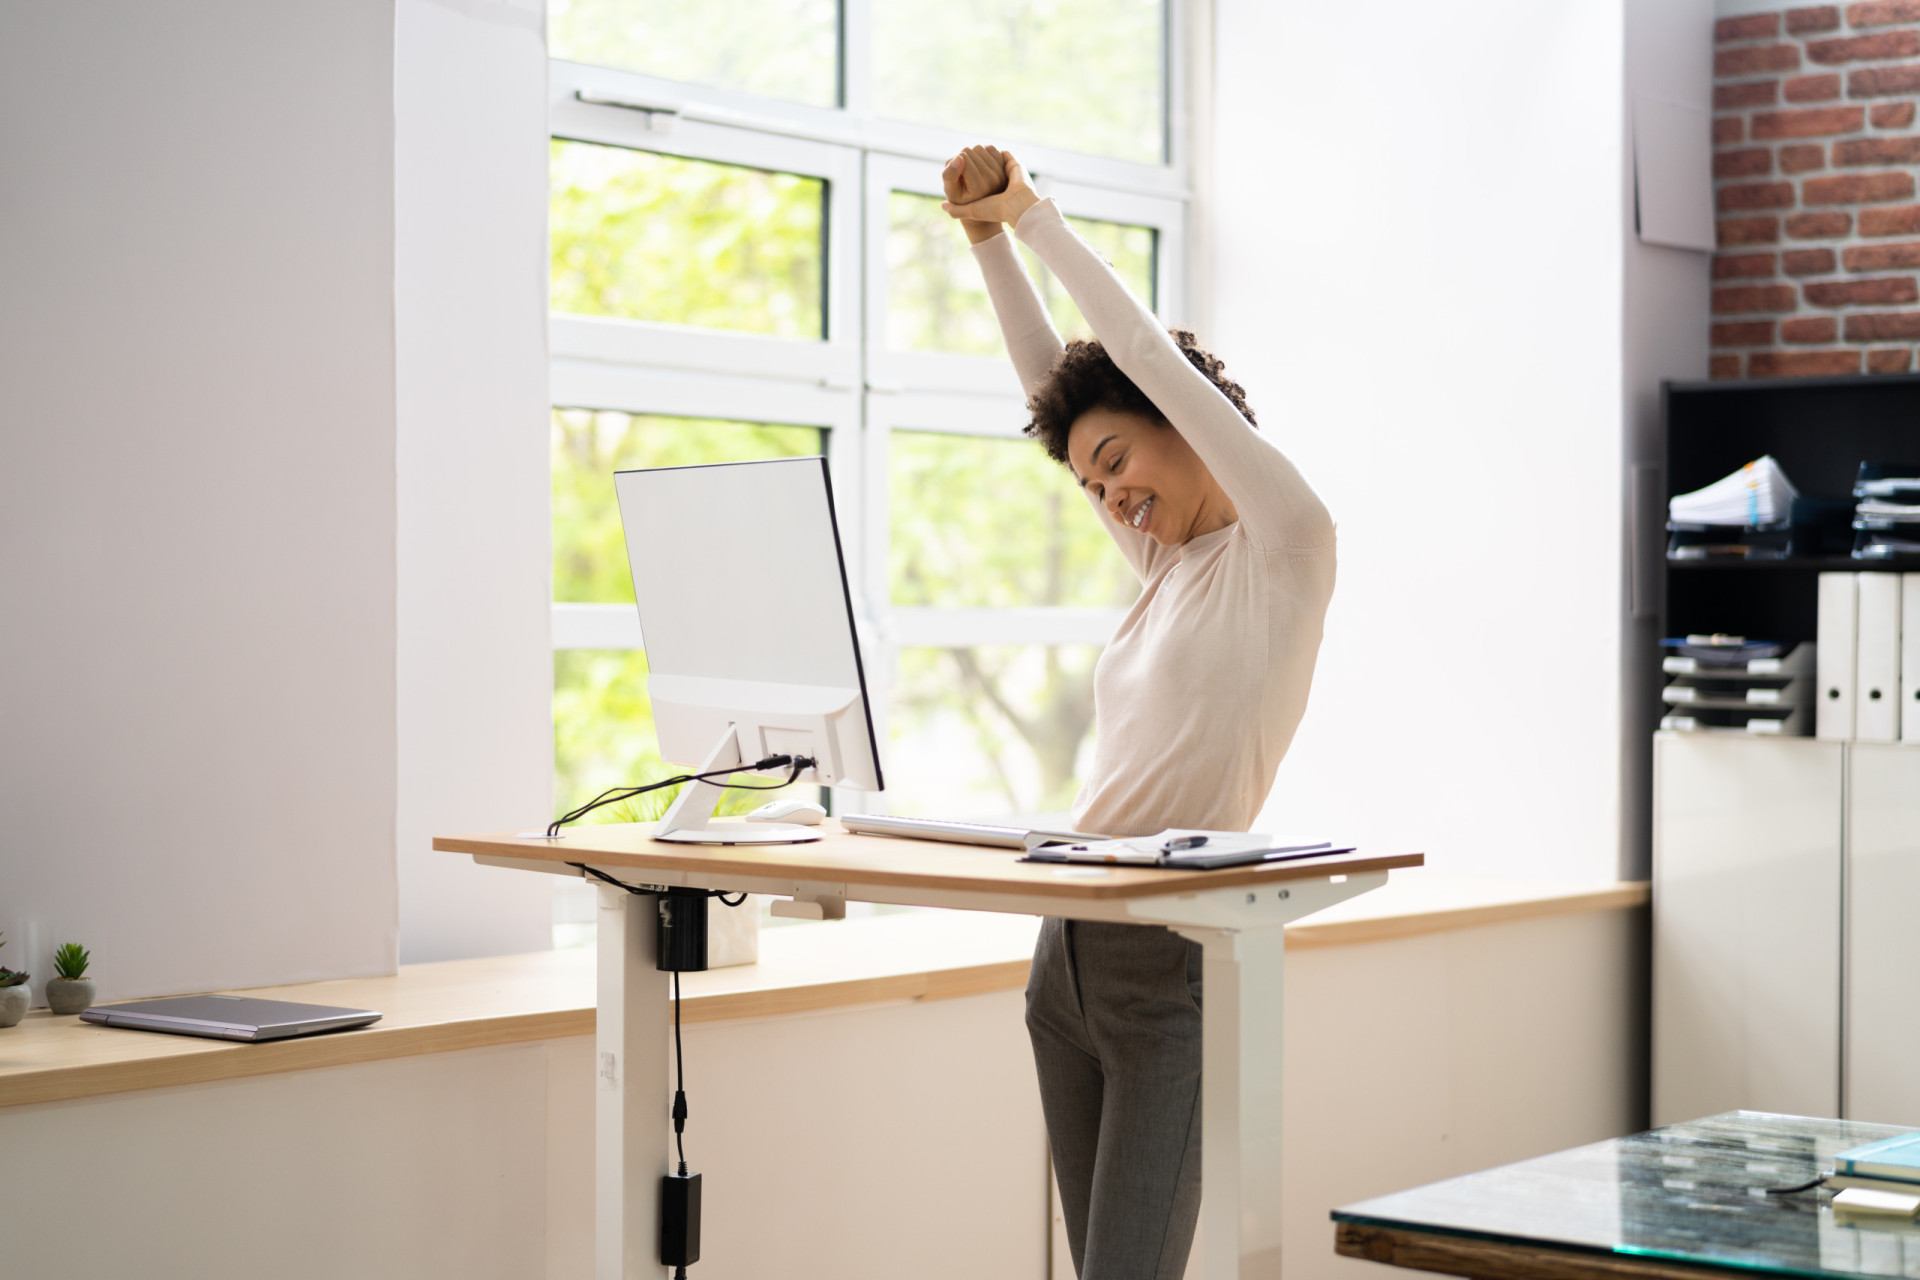 <p>Avoid sitting for a long period of time in everyday life, too. Get up to stretch periodically while you’re working or watching TV.</p><p>You may also like:<a href="https://www.starsinsider.com/n/467585?utm_source=msn.com&utm_medium=display&utm_campaign=referral_description&utm_content=540572en-en"> Signs that someone will grow up to be a millionaire</a></p>